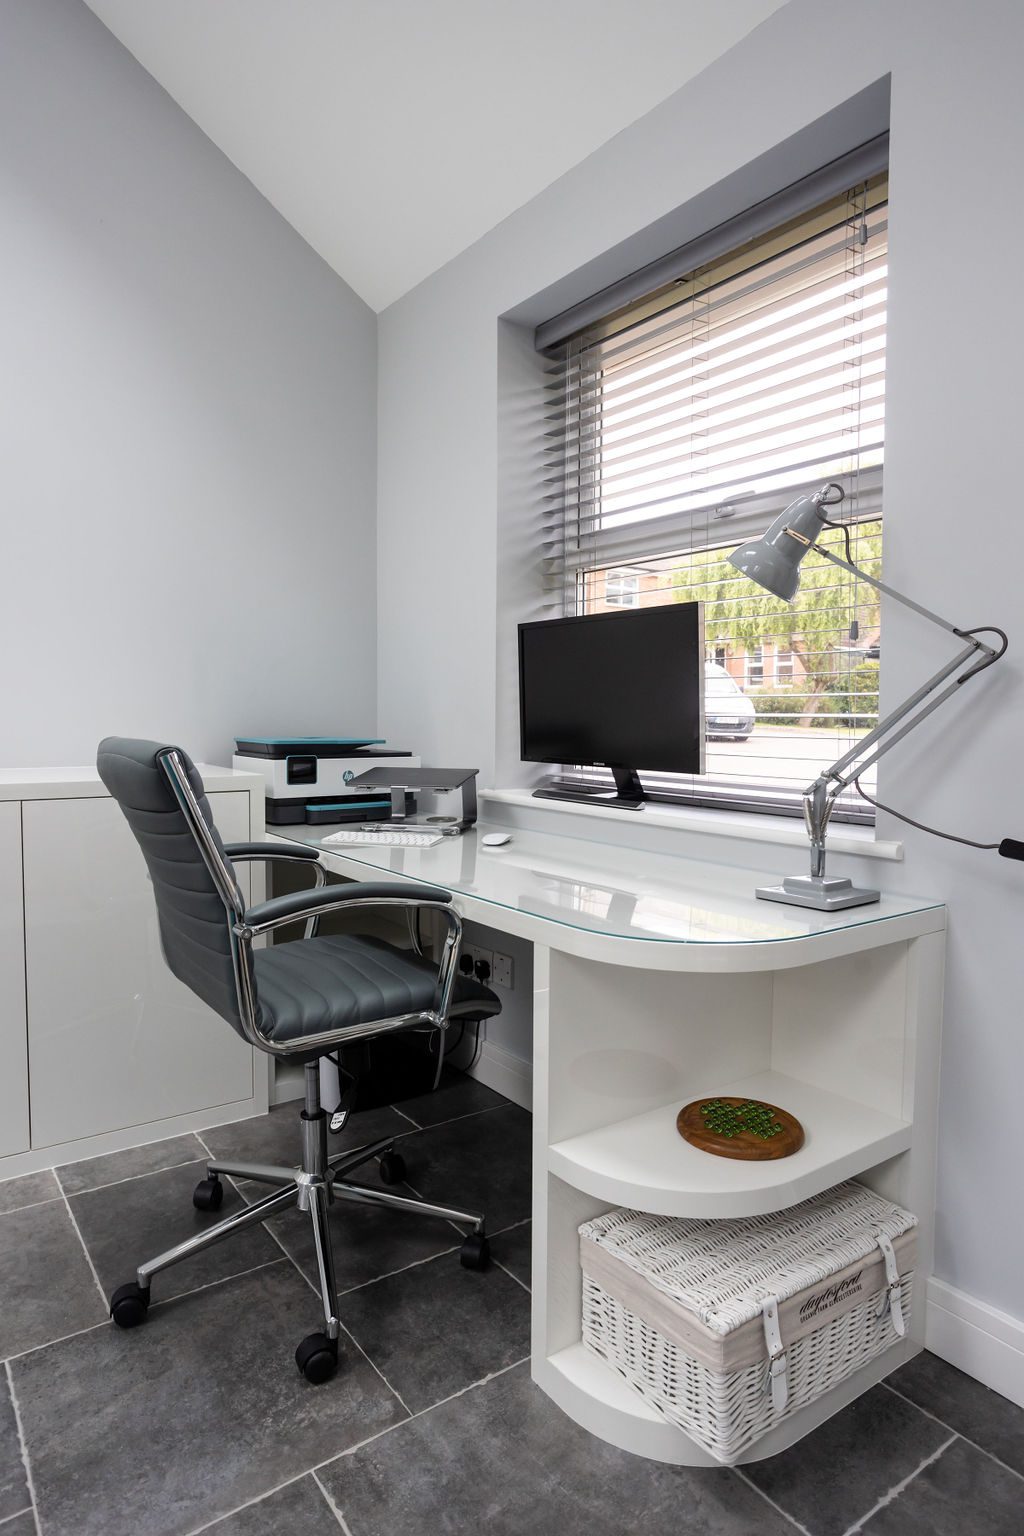 Image of a modern home office with desk and shelving